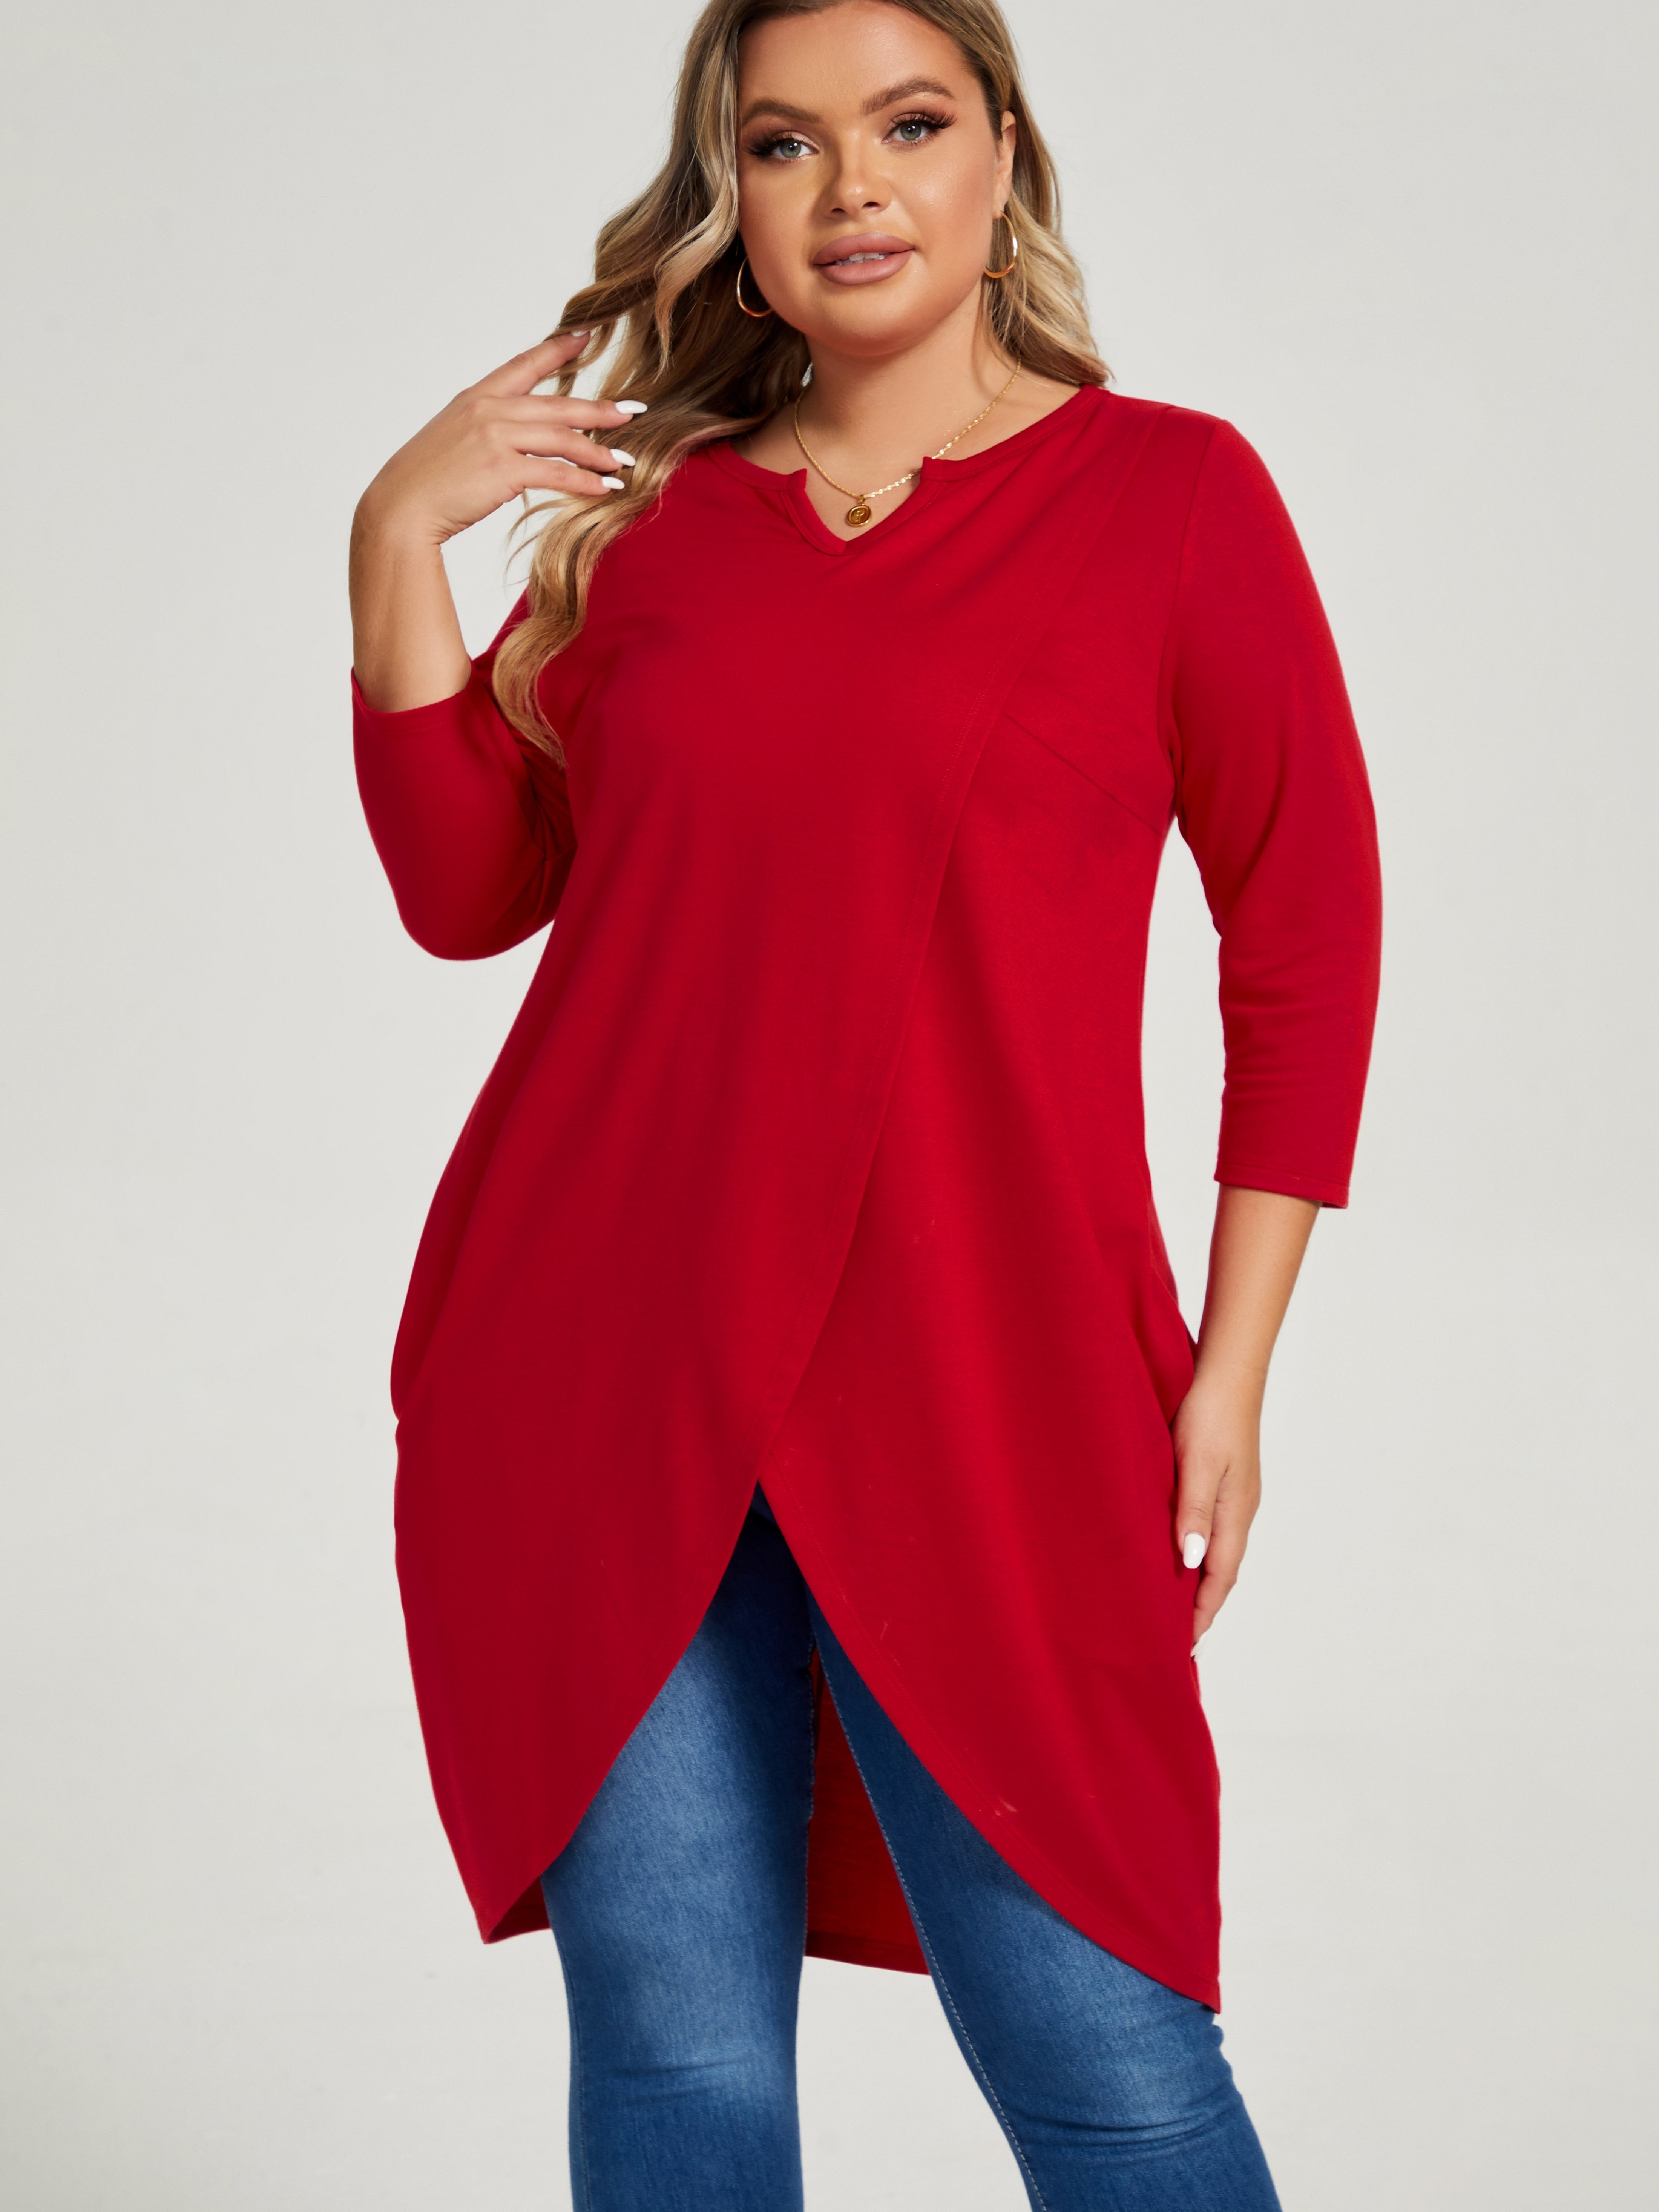 Womens Long Sleeve Tops Twist Front Tunic Tops To Wear With Leggings Womens  Long Sleeve Layering Shirt Shirt Shirts for Women Long Sleeve Undershirts